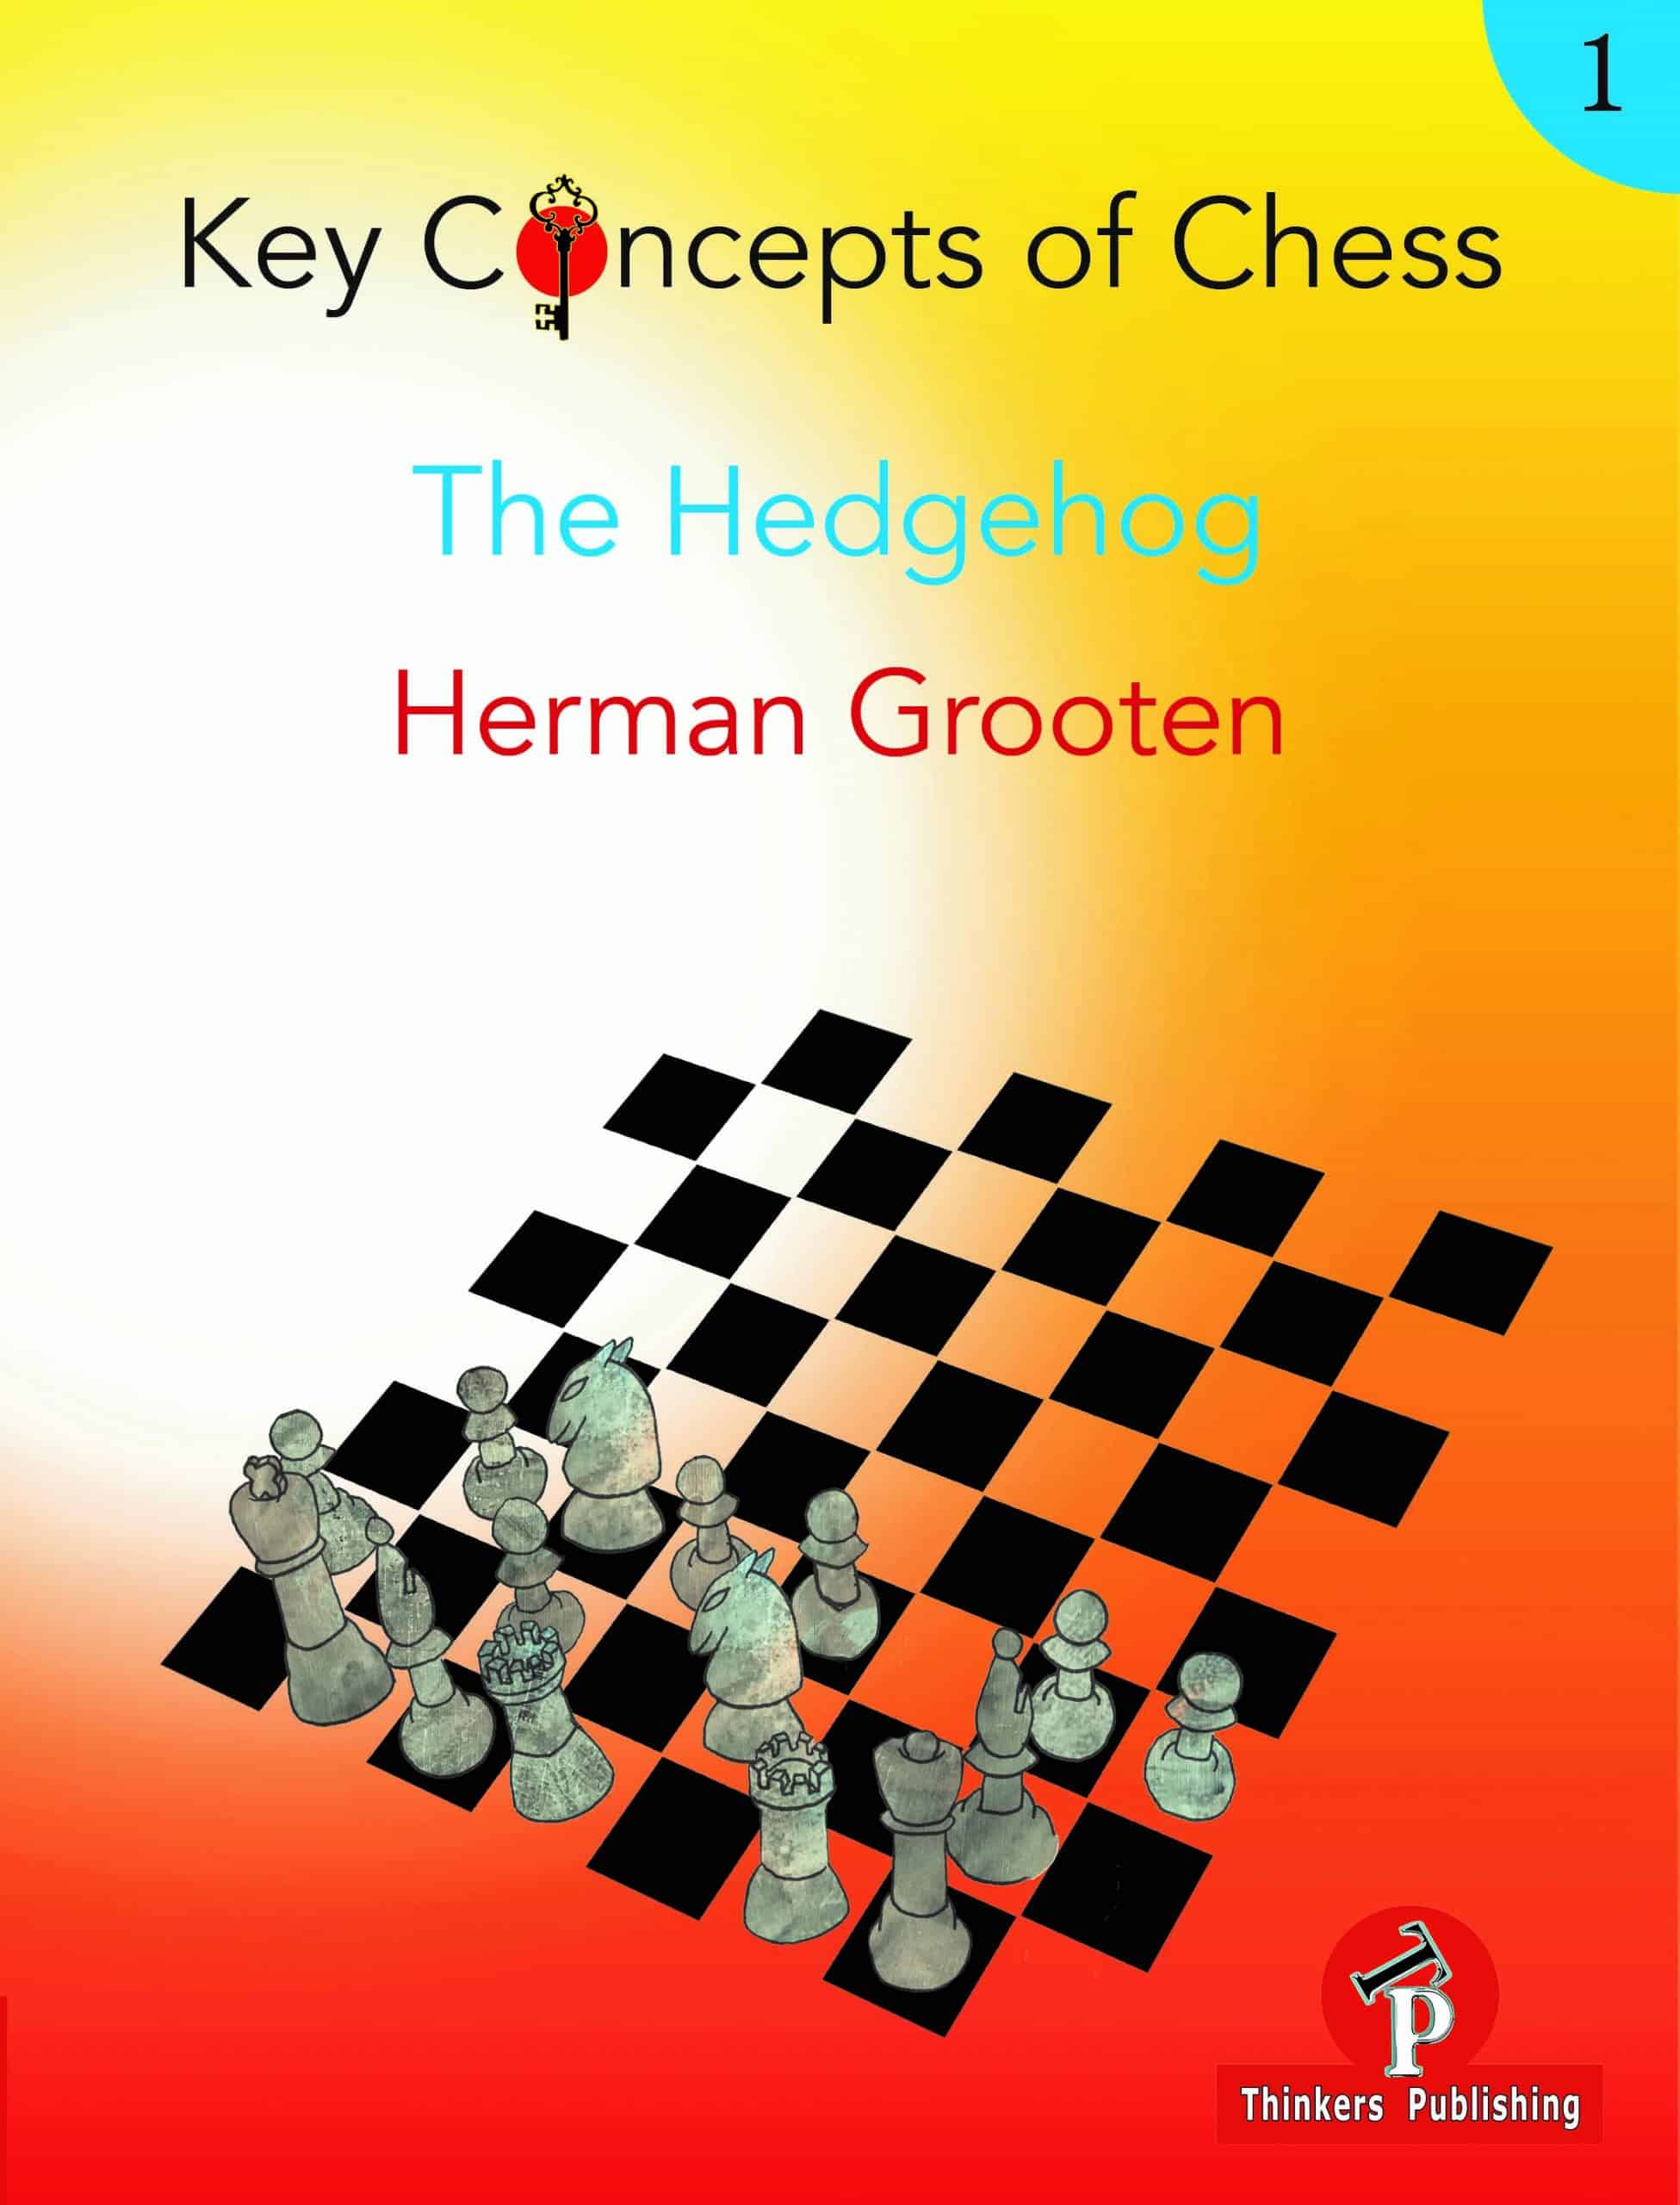 Key Concepts of Chess. The Hedhehog